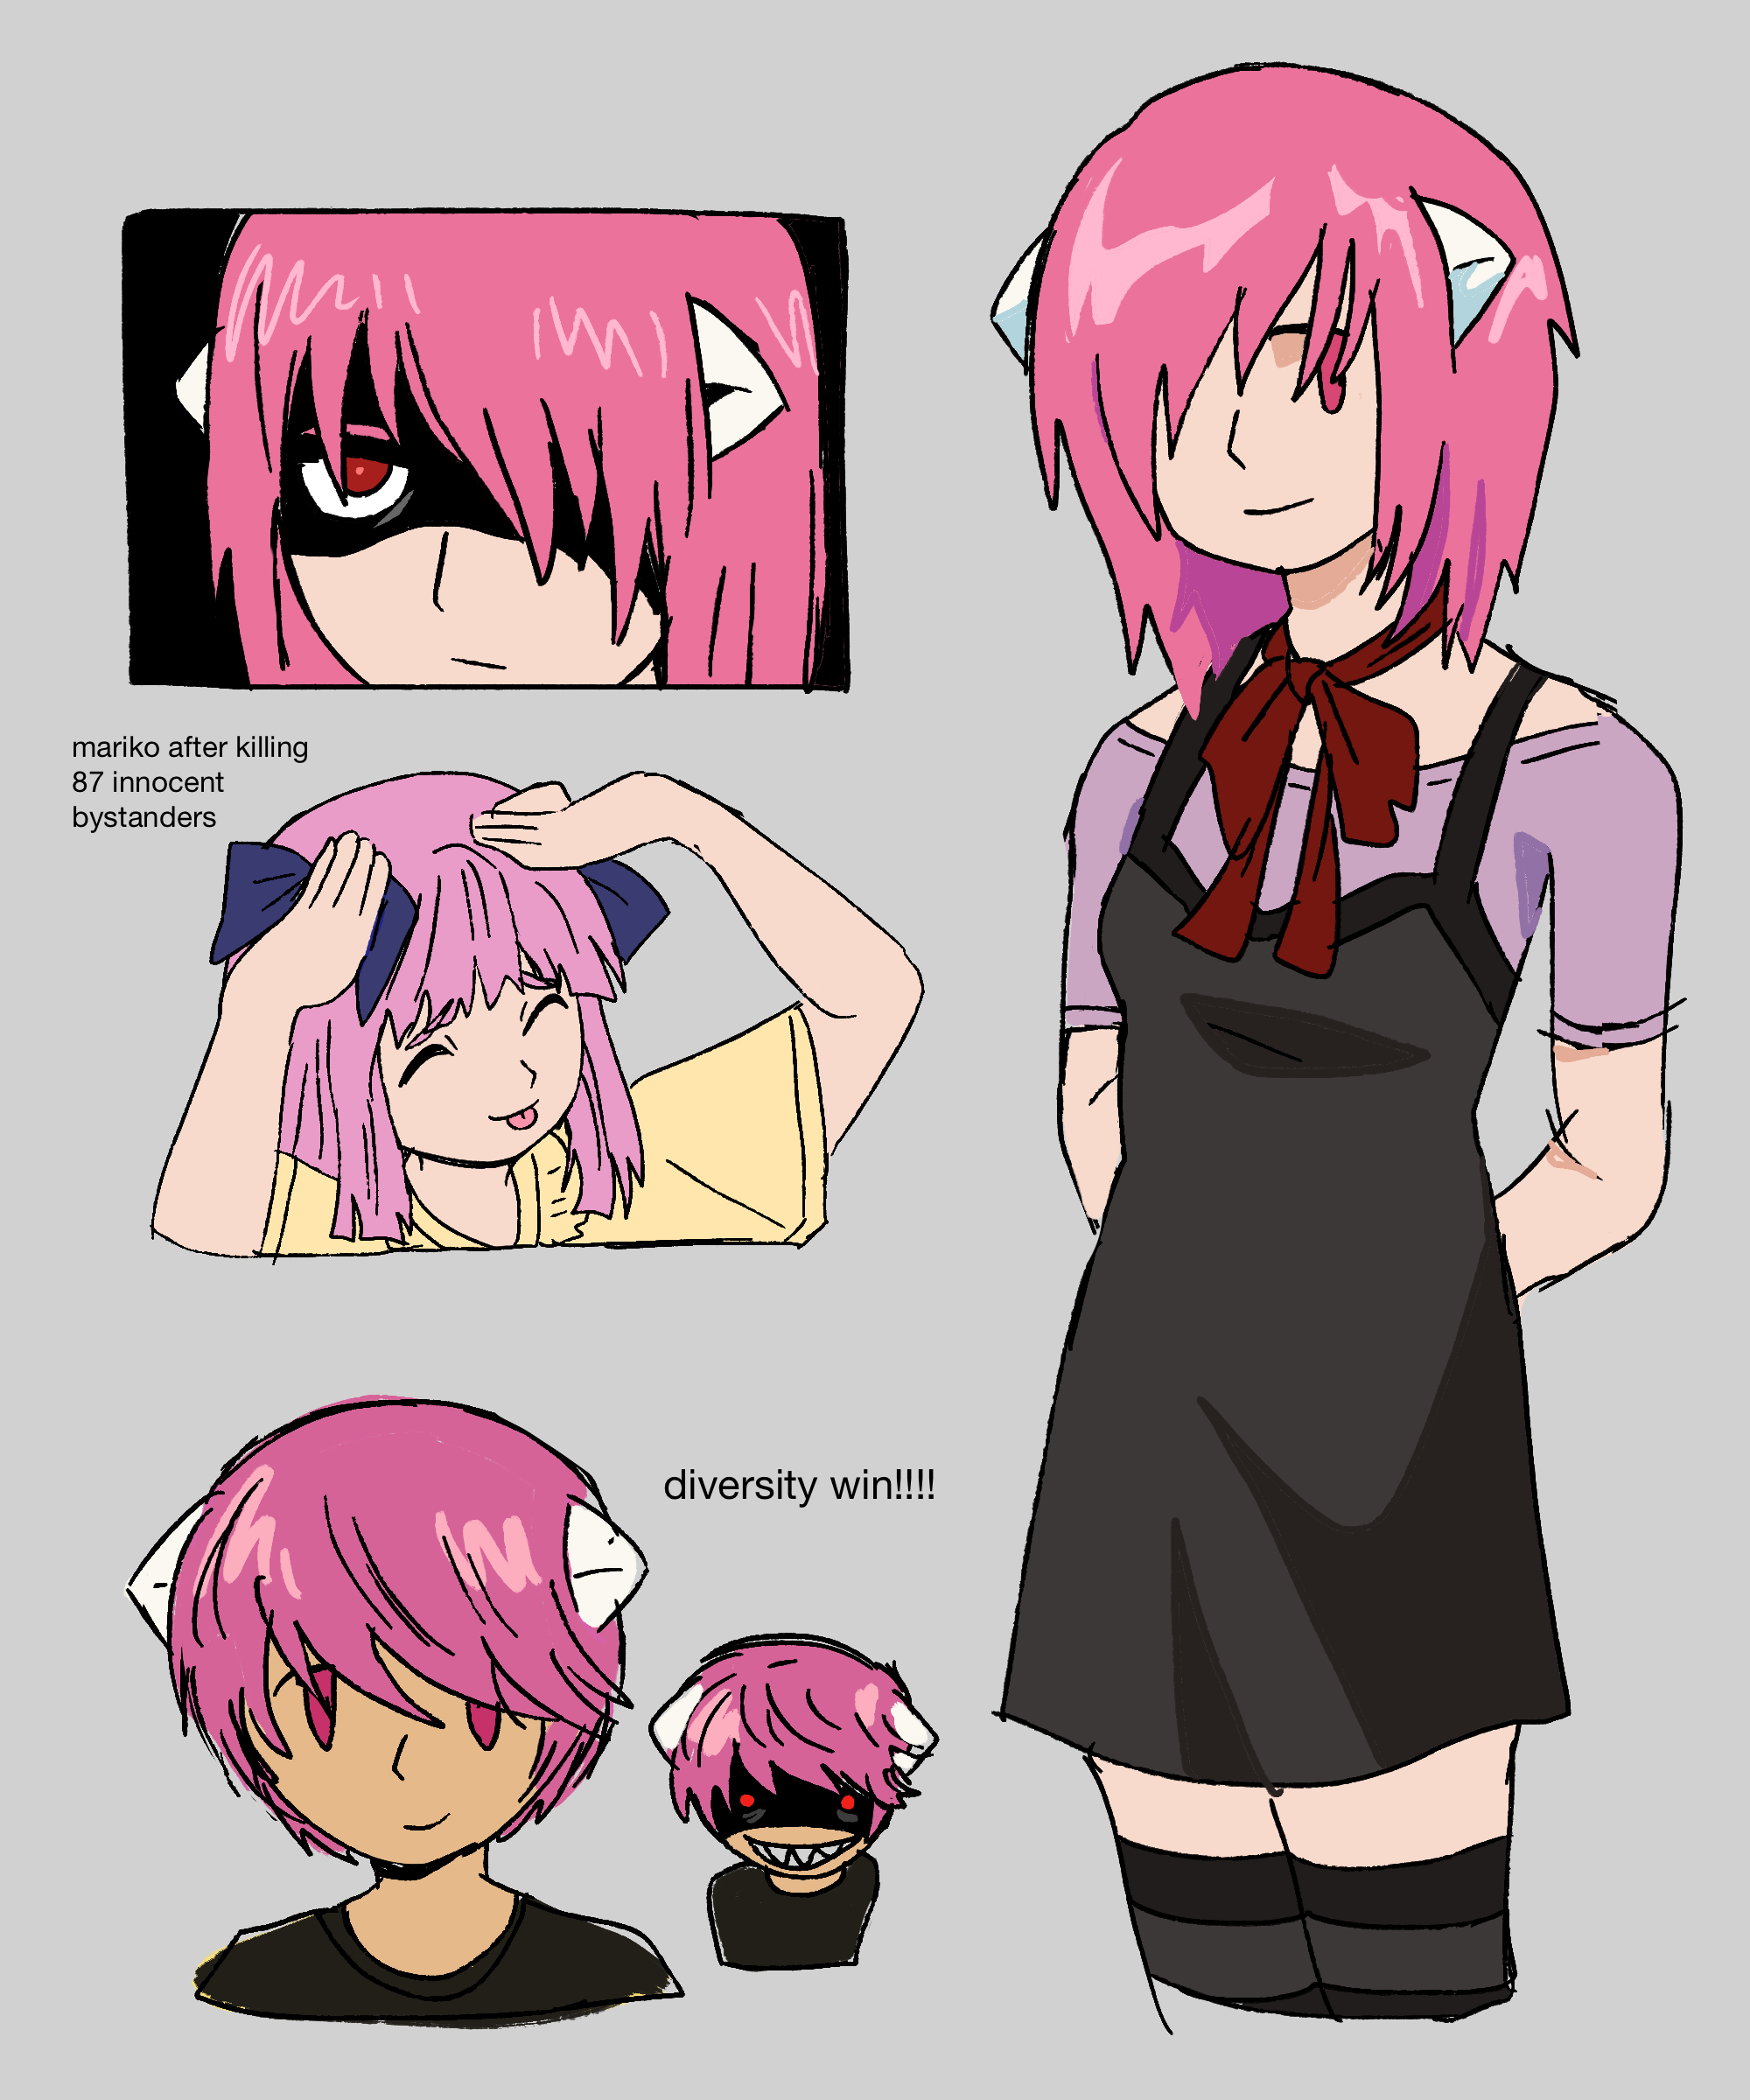 Elfen Lied: Lucy of Akatsuki / Lucy of illustrations [pixiv